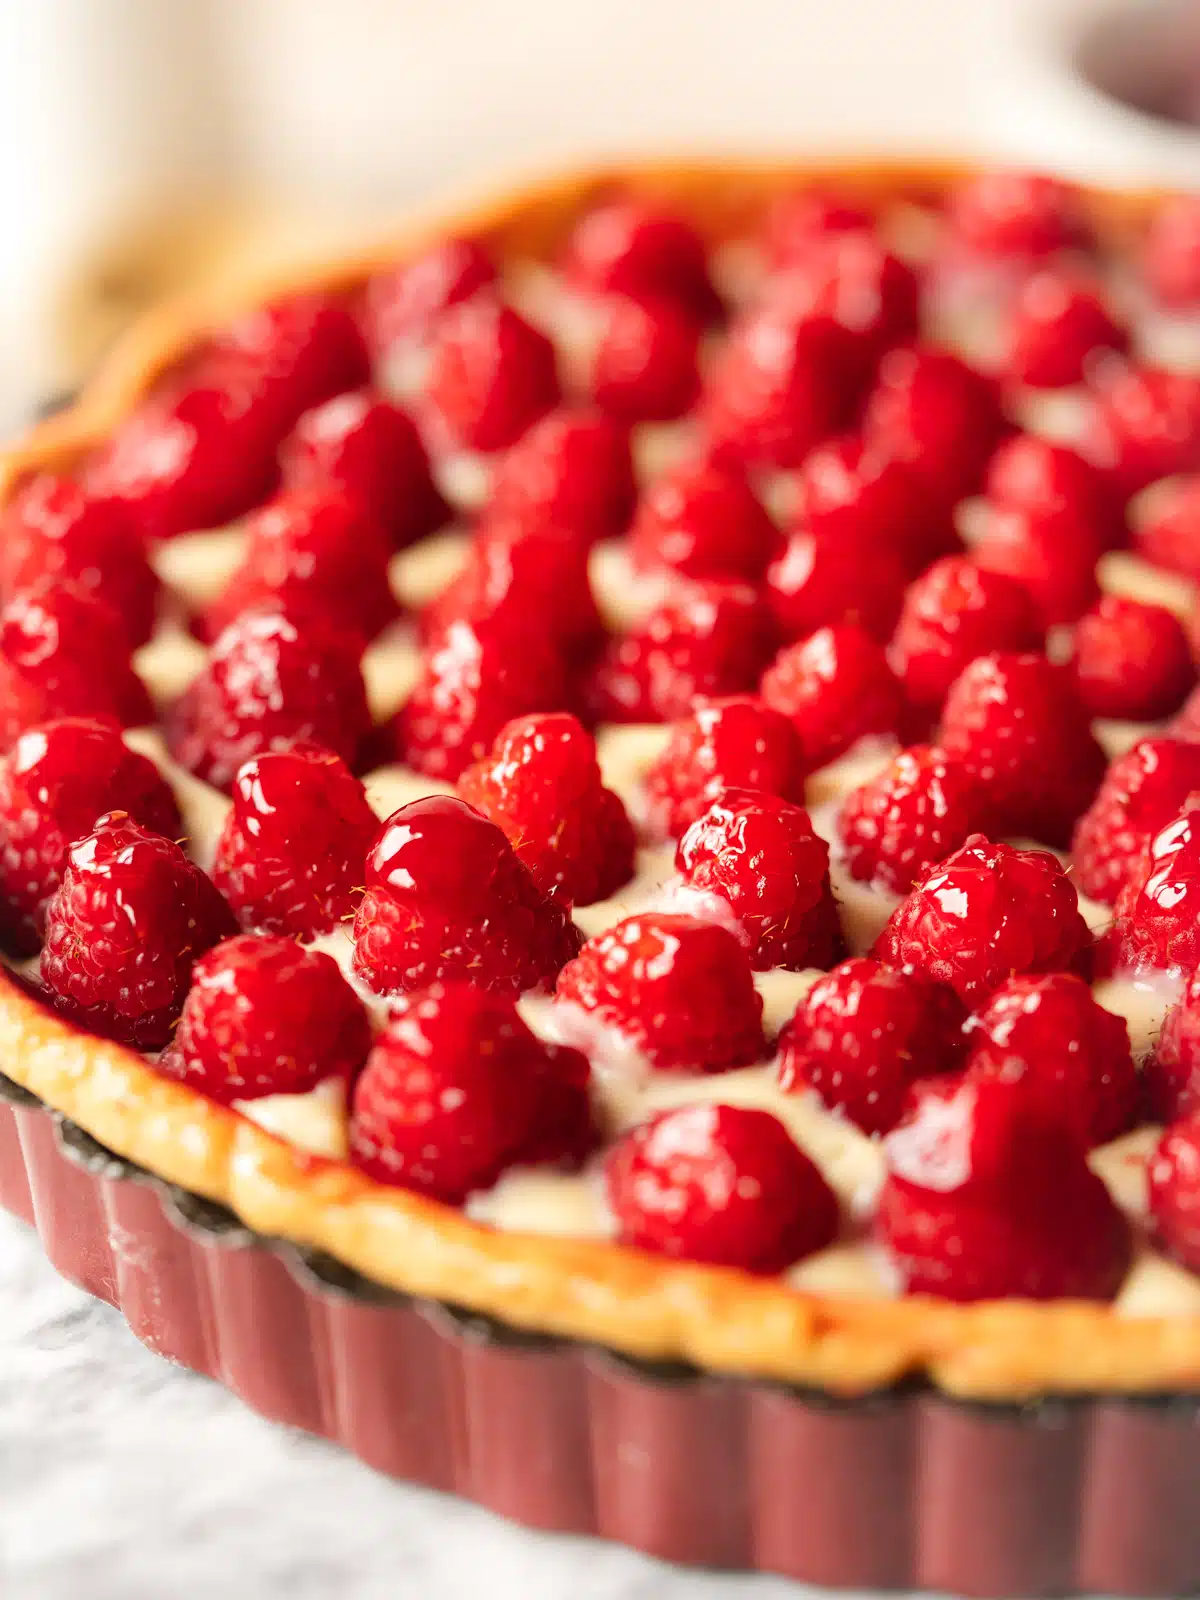 close up of raspberry tart showing the glossy berries glazed with raspberry jam on a layer of dairy-free custard.